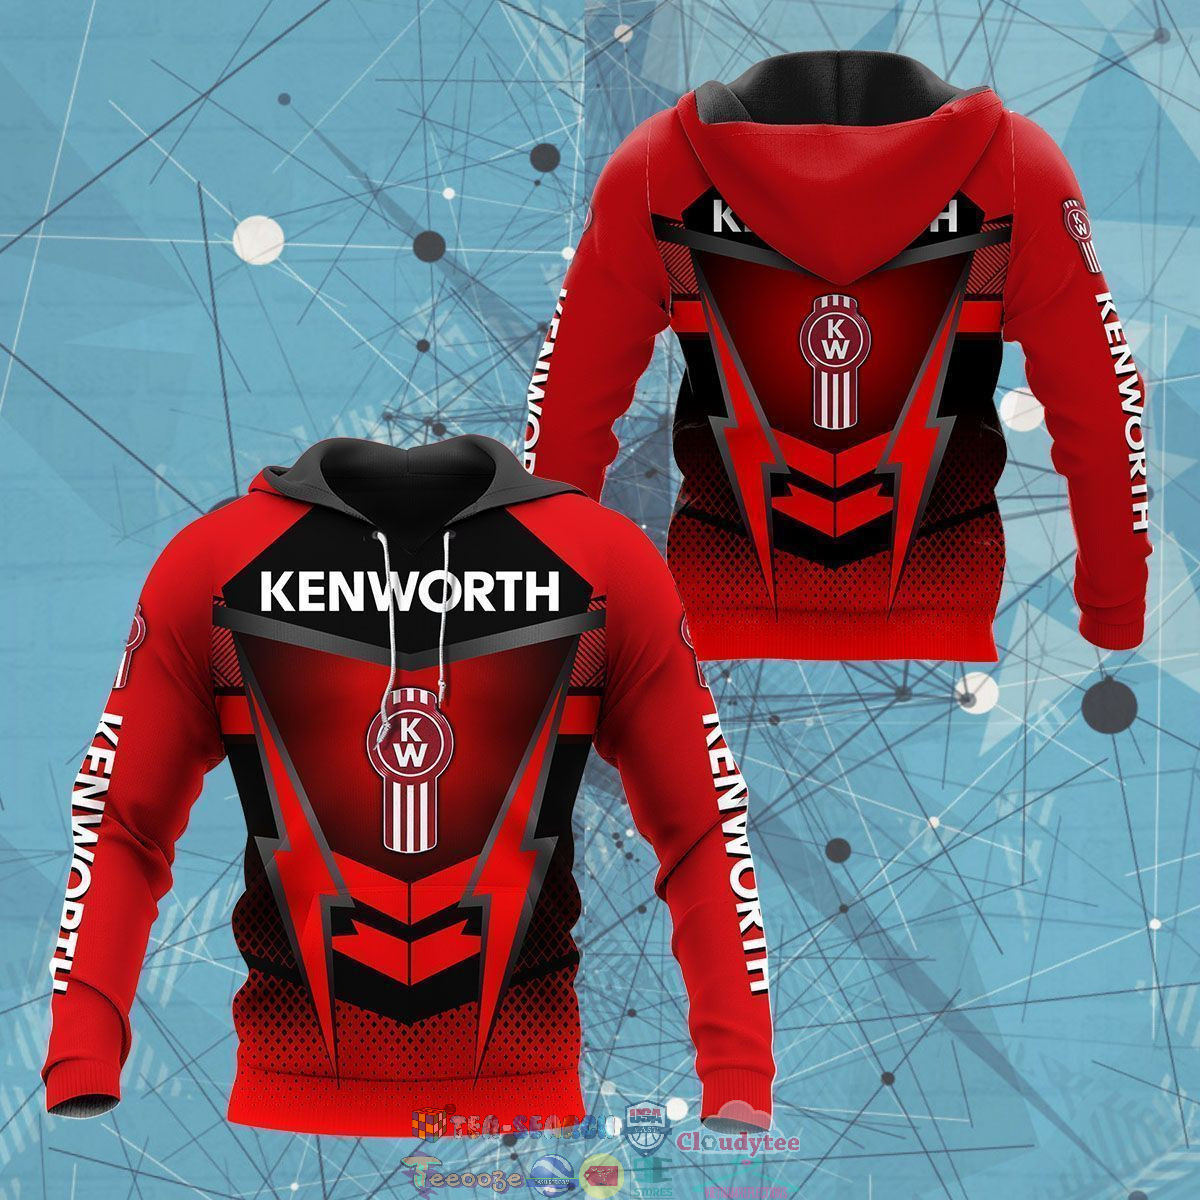 Kenworth ver 6 3D hoodie and t-shirt